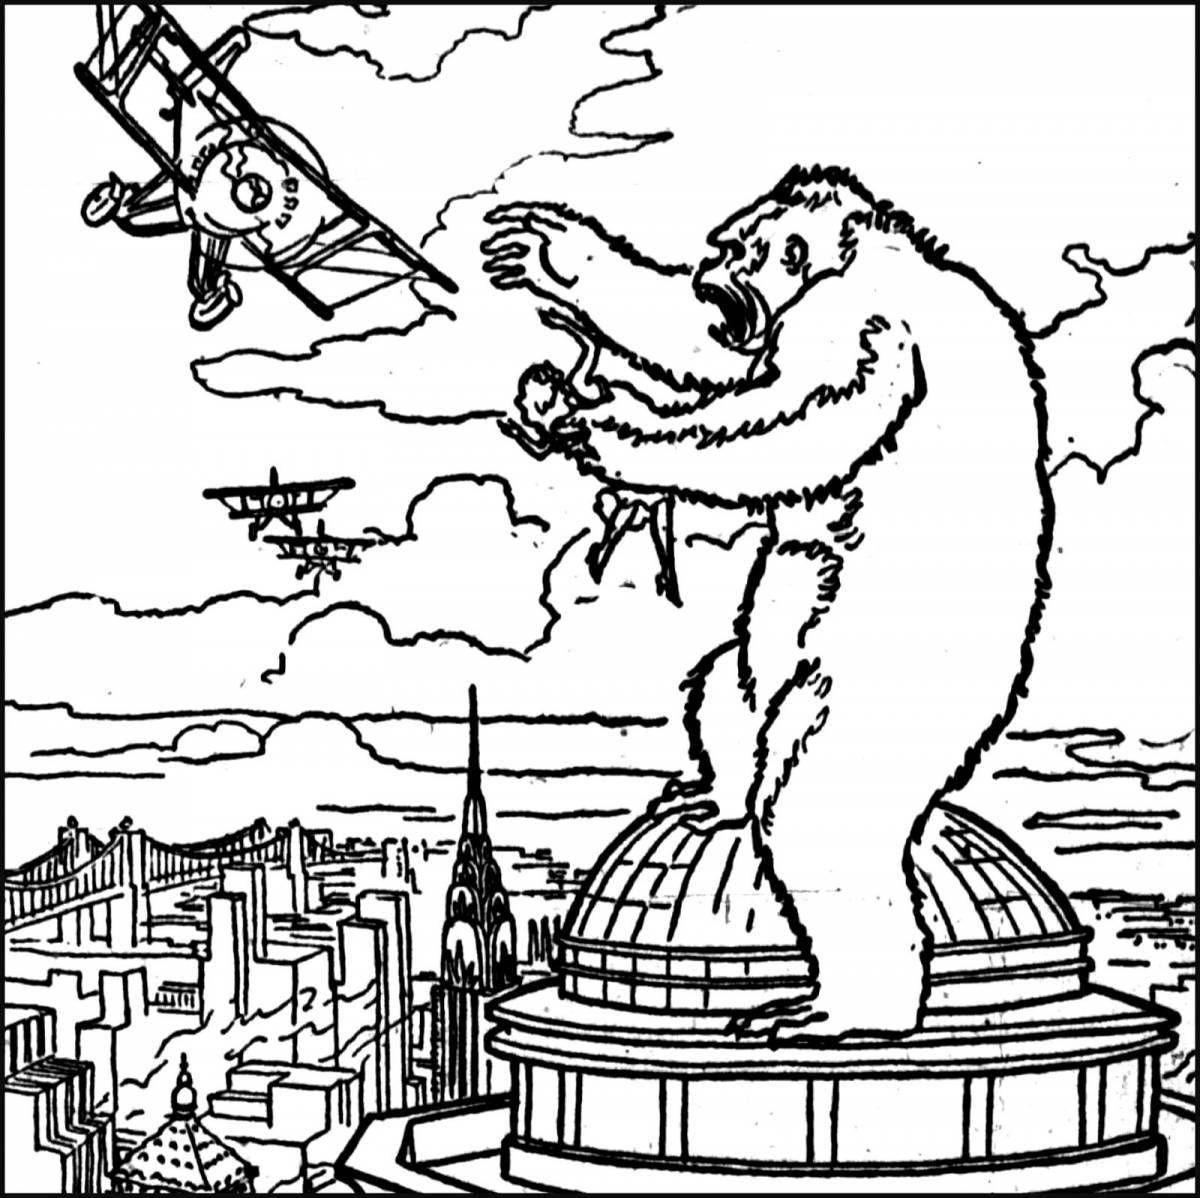 Majestic king kong coloring page